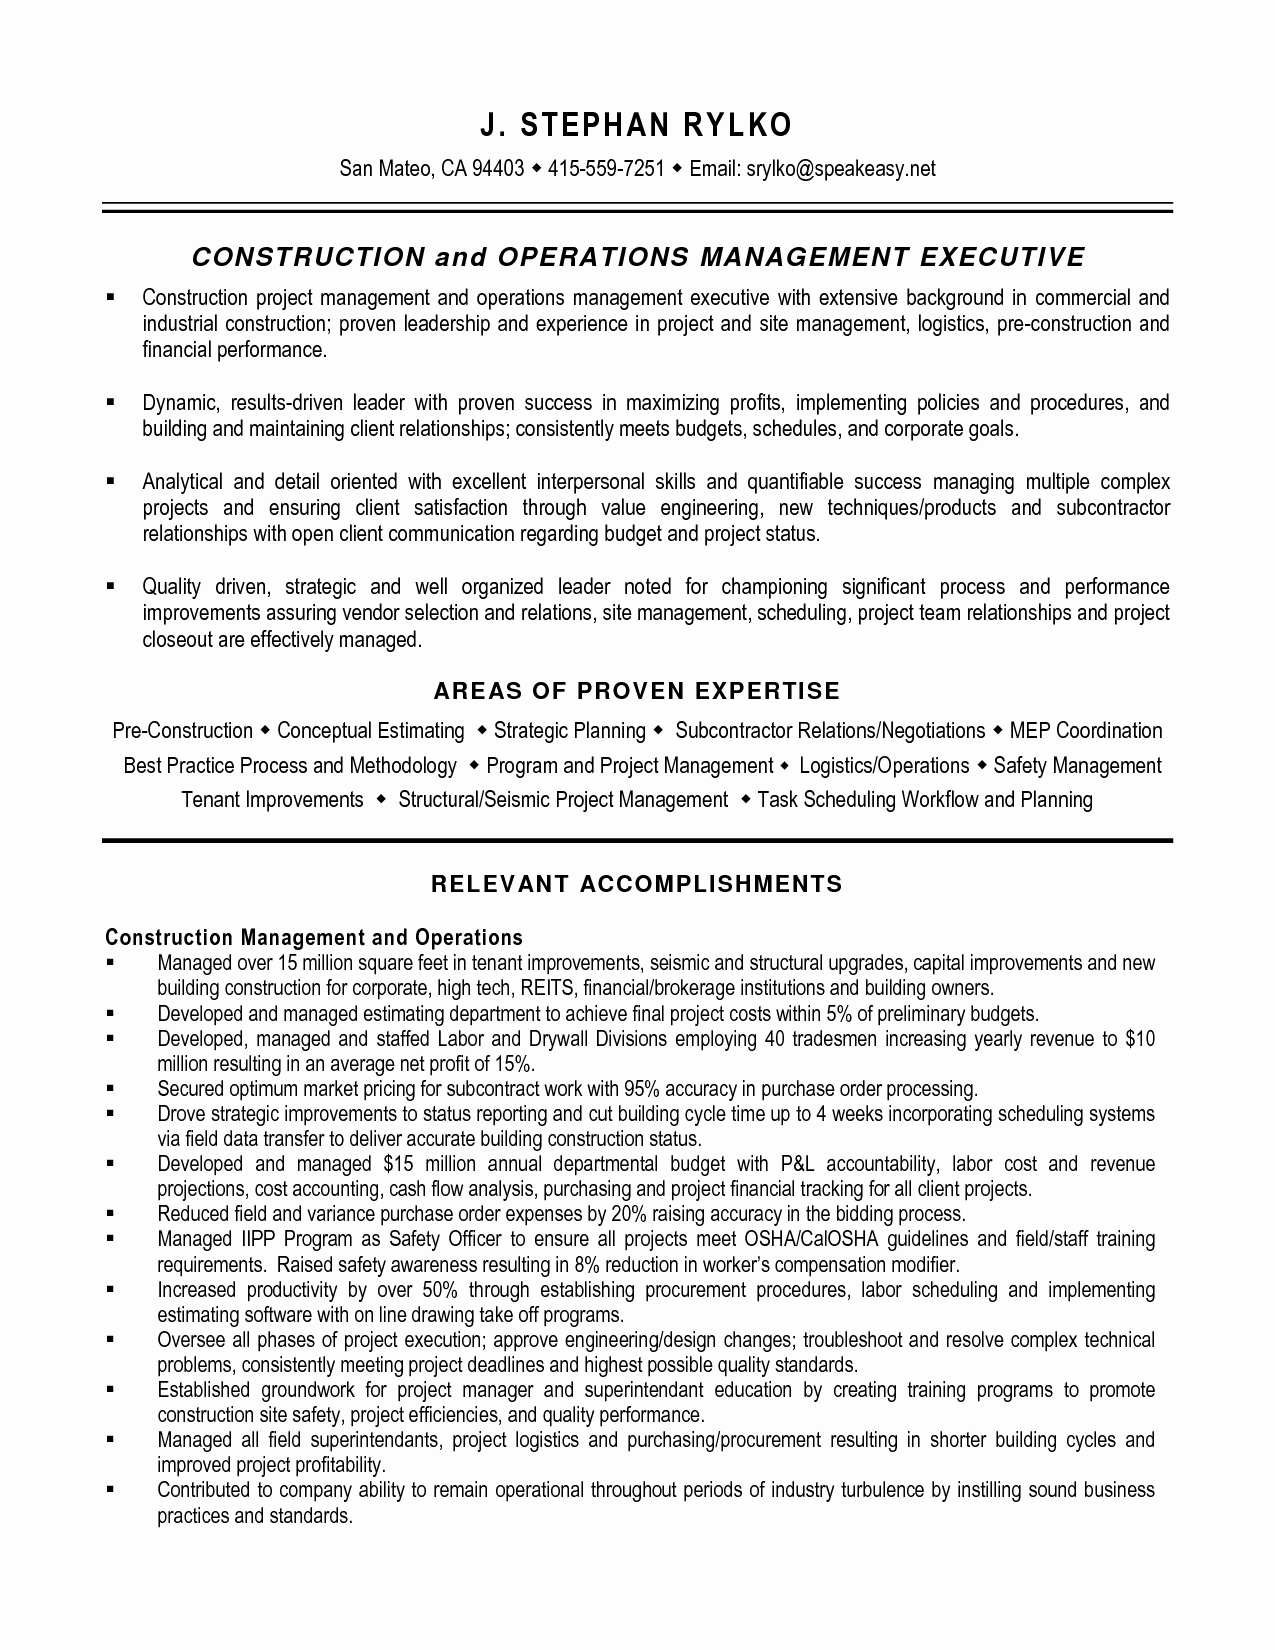 Project Manager Resume Writer Construction Management